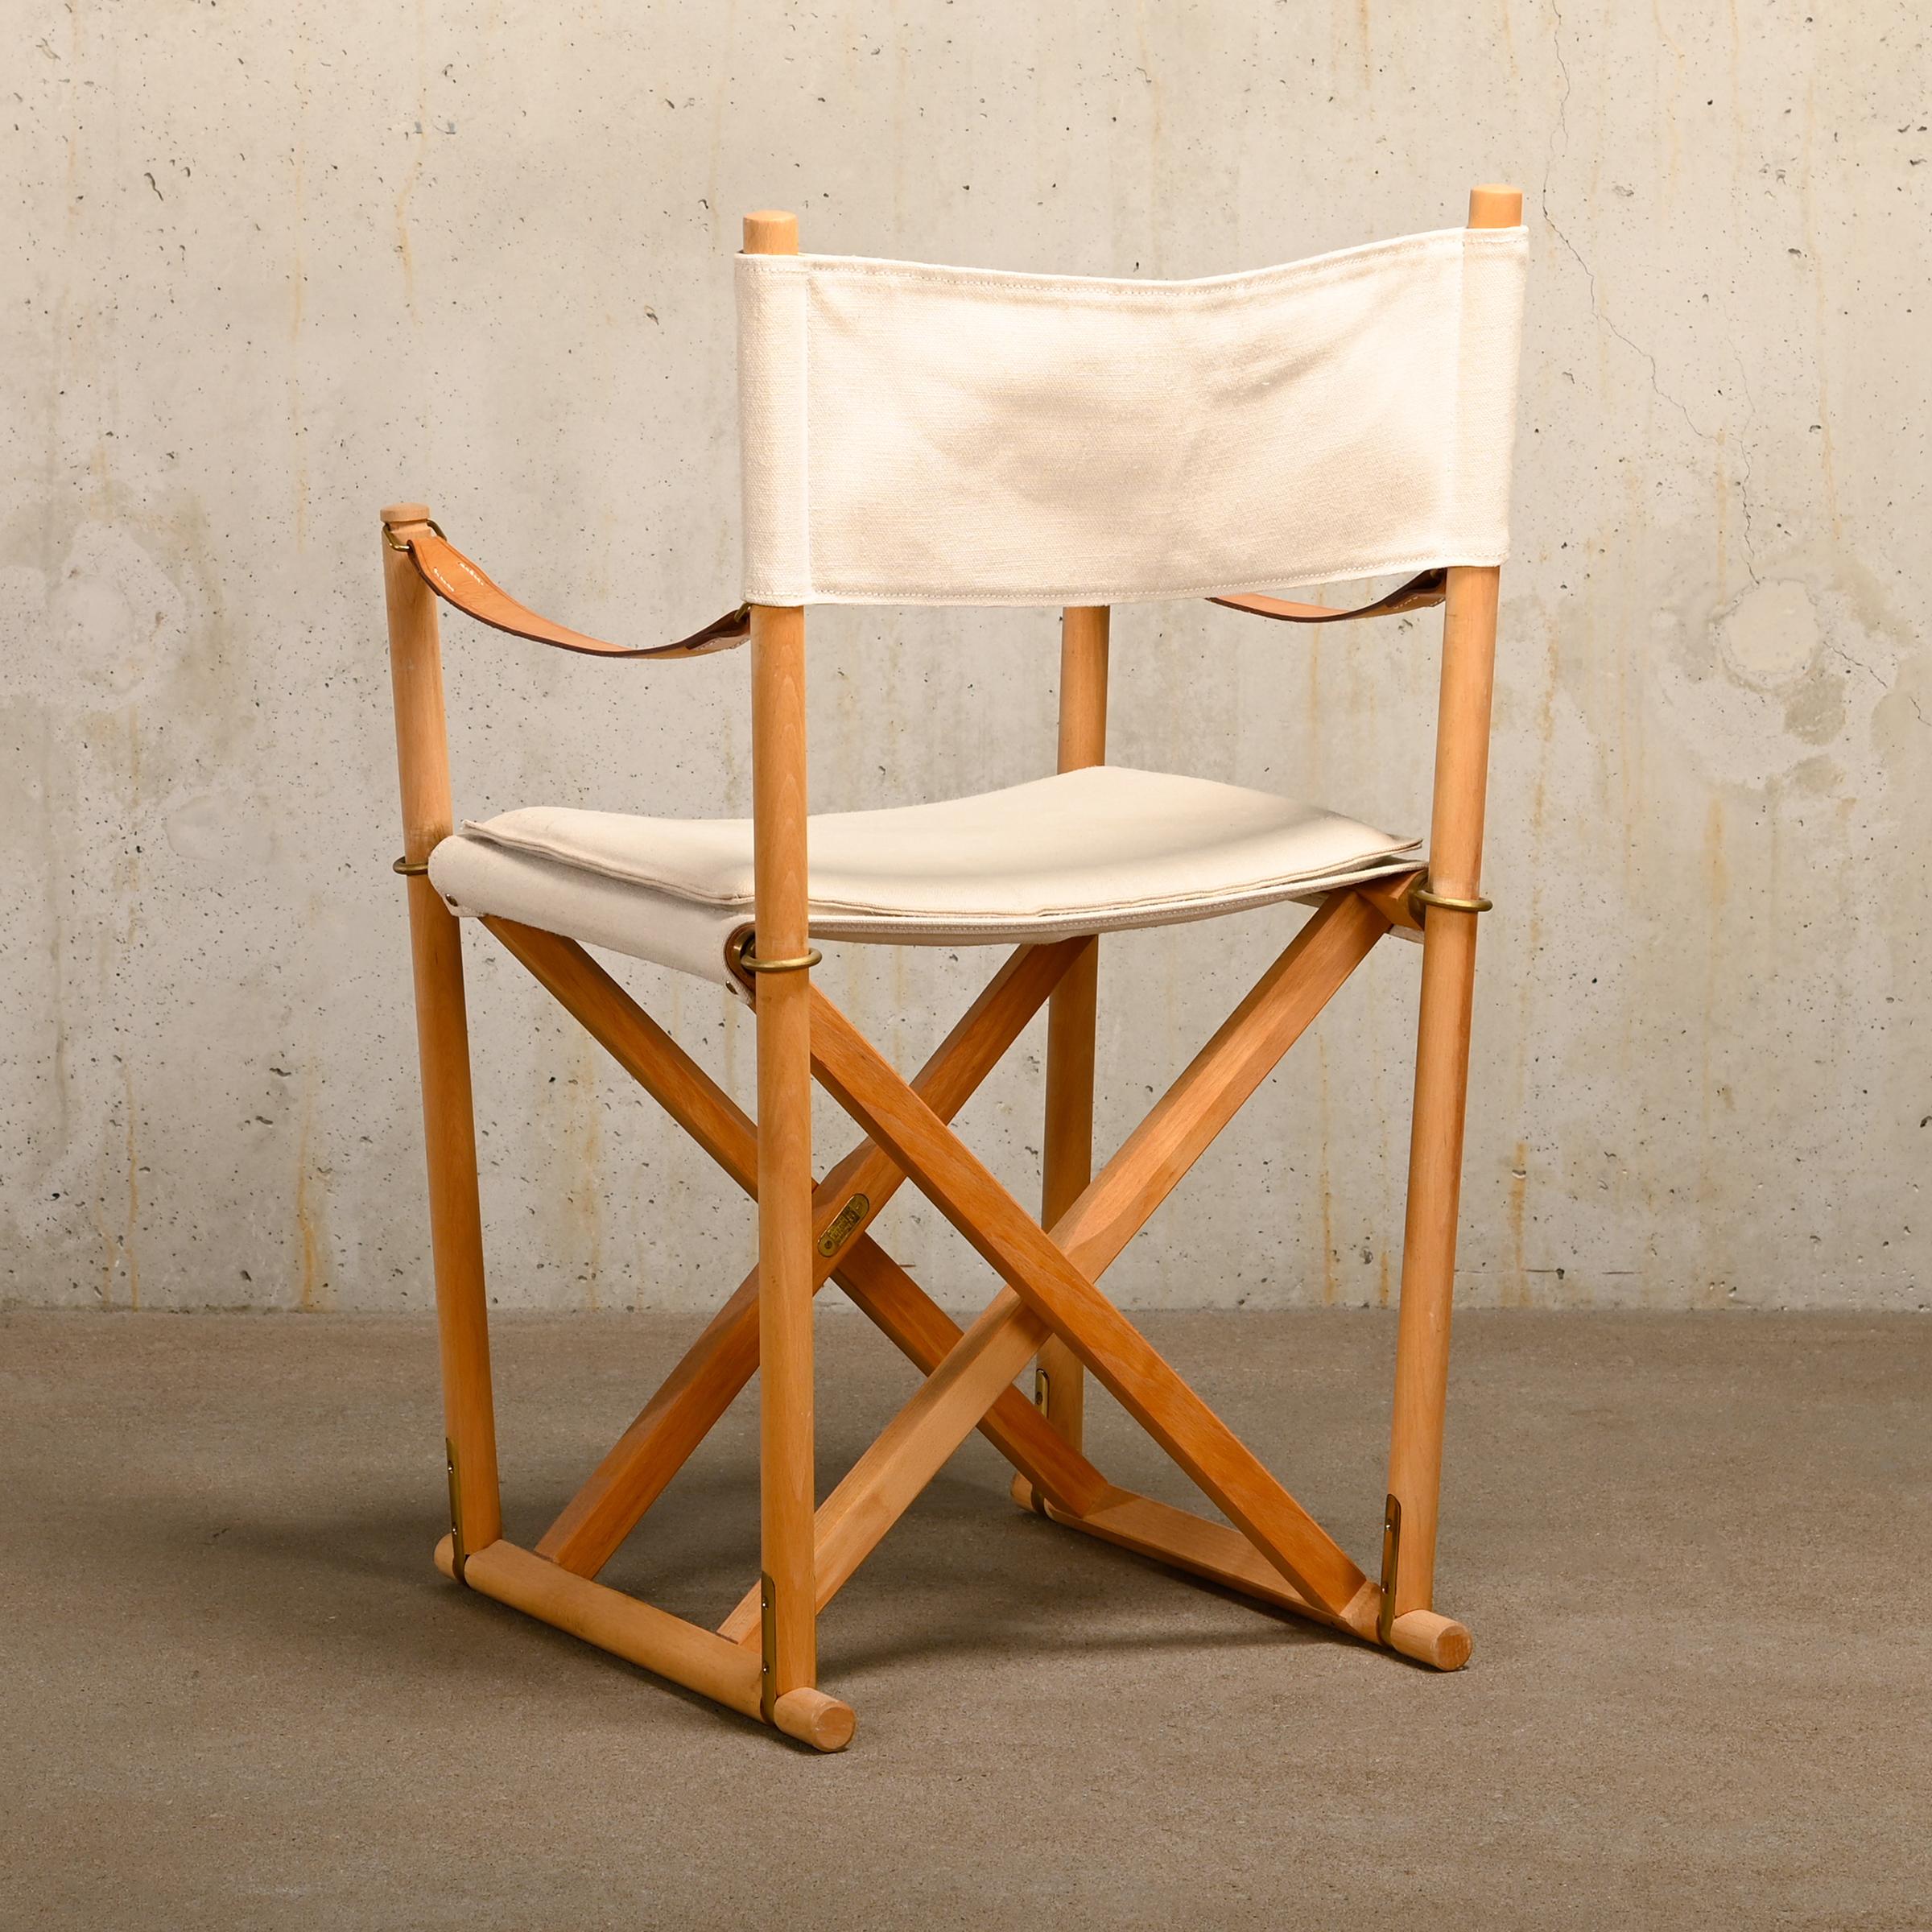 Mid-20th Century Mogens Koch MK16 Folding Chair in Beech Wood and Canvas for Rud Rasmussen, DK